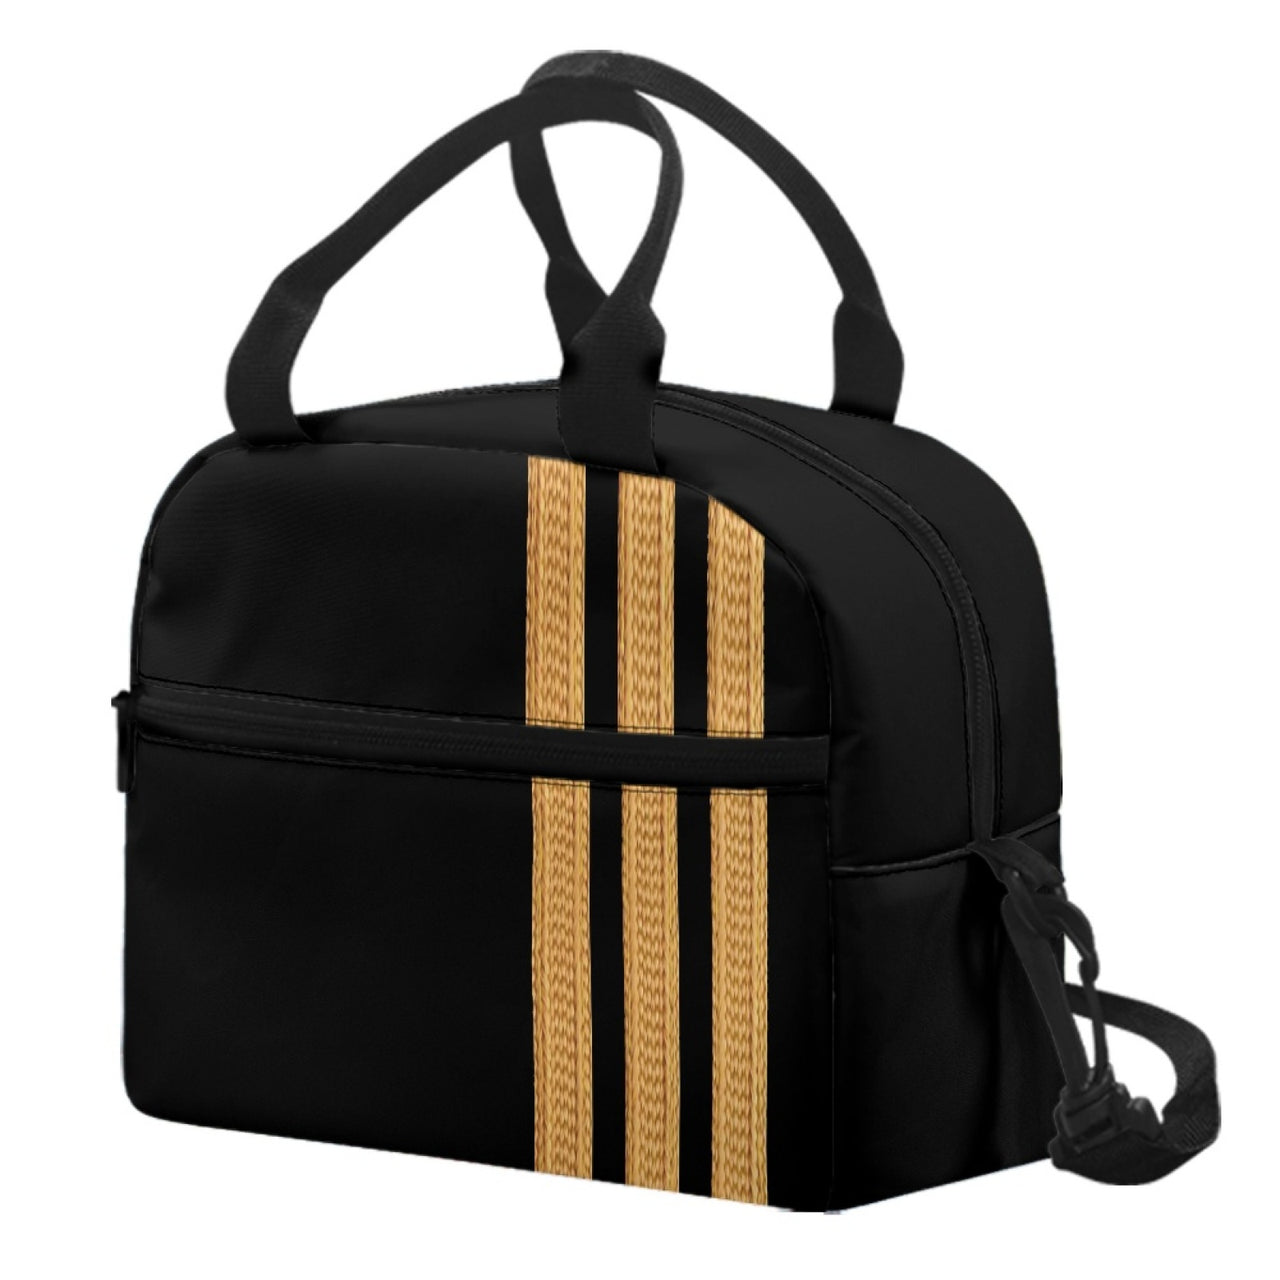 Special Golden Epaulettes (4,3,2 Lines) Designed Lunch Bags